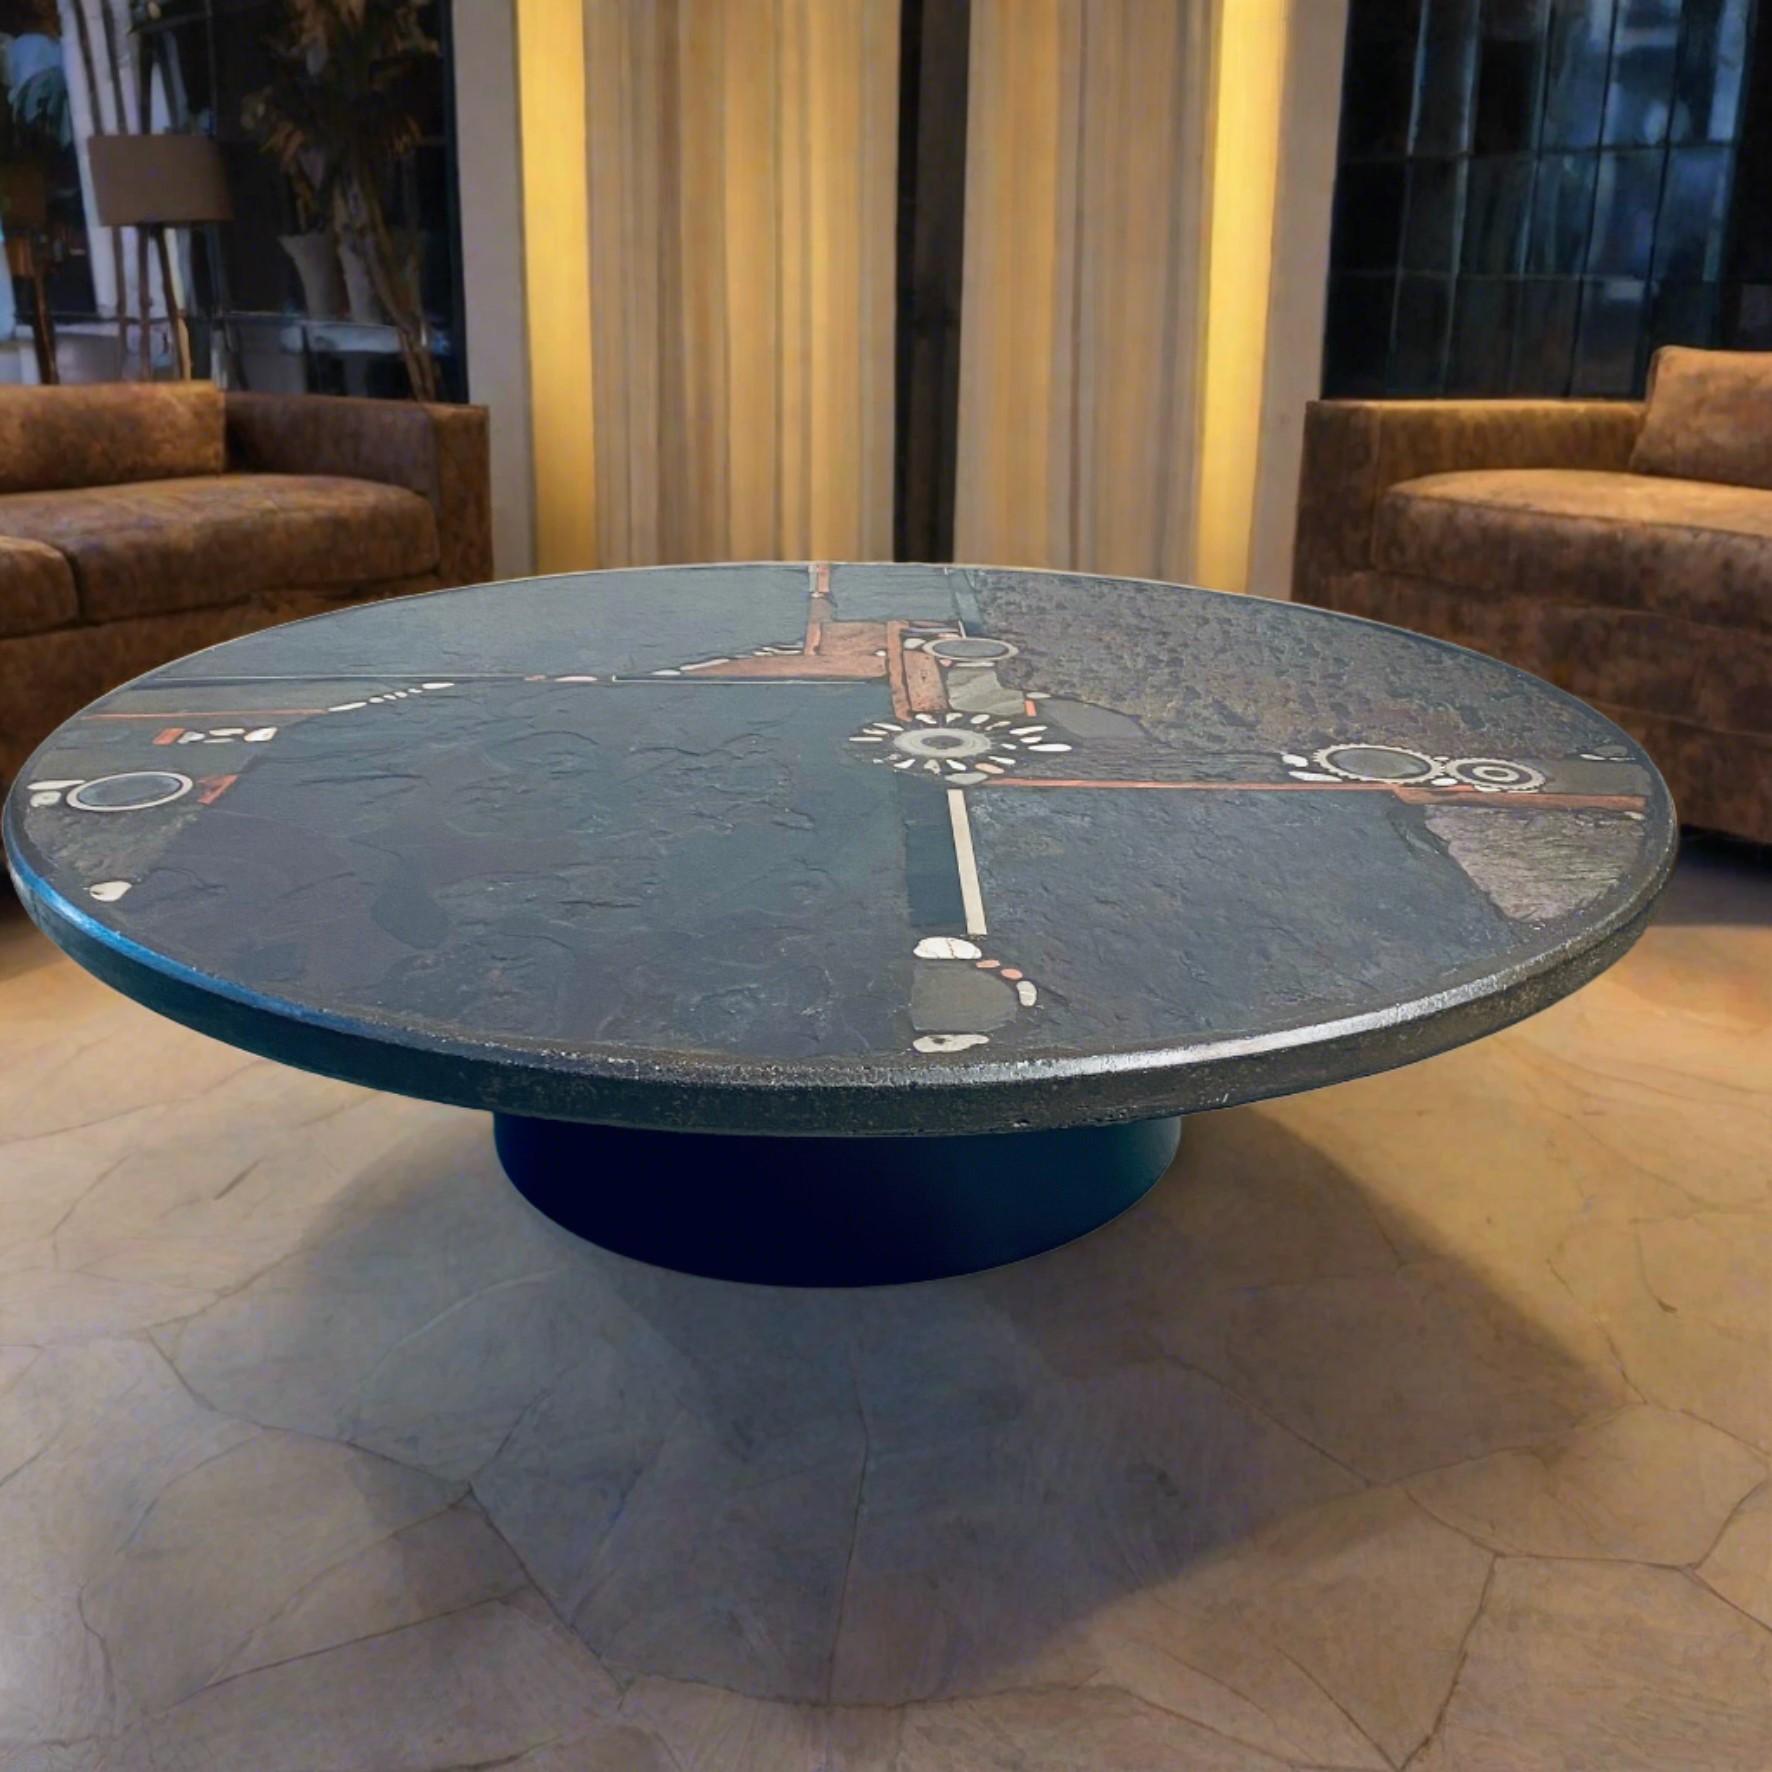 Mid-Century Modern Brutalist Round Coffee Table by Sculptor Paul Kingma, Netherlands, 1984 For Sale